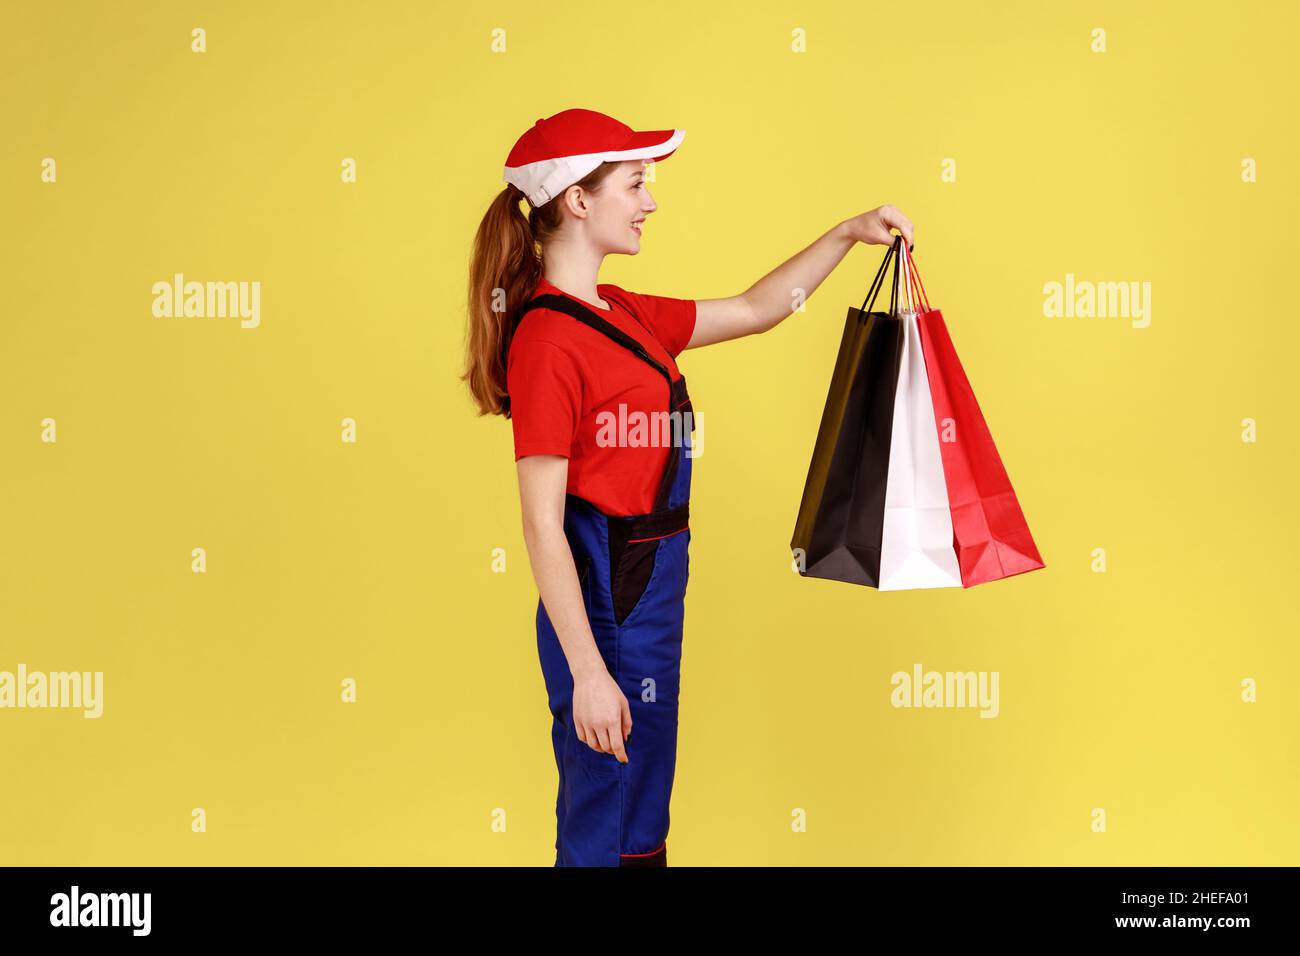 Side view portrait of optimistic courier woman standing with shopping bags in hands, expressing happiness, wearing overalls and red cap. Indoor studio shot isolated on yellow background. Stock Photo